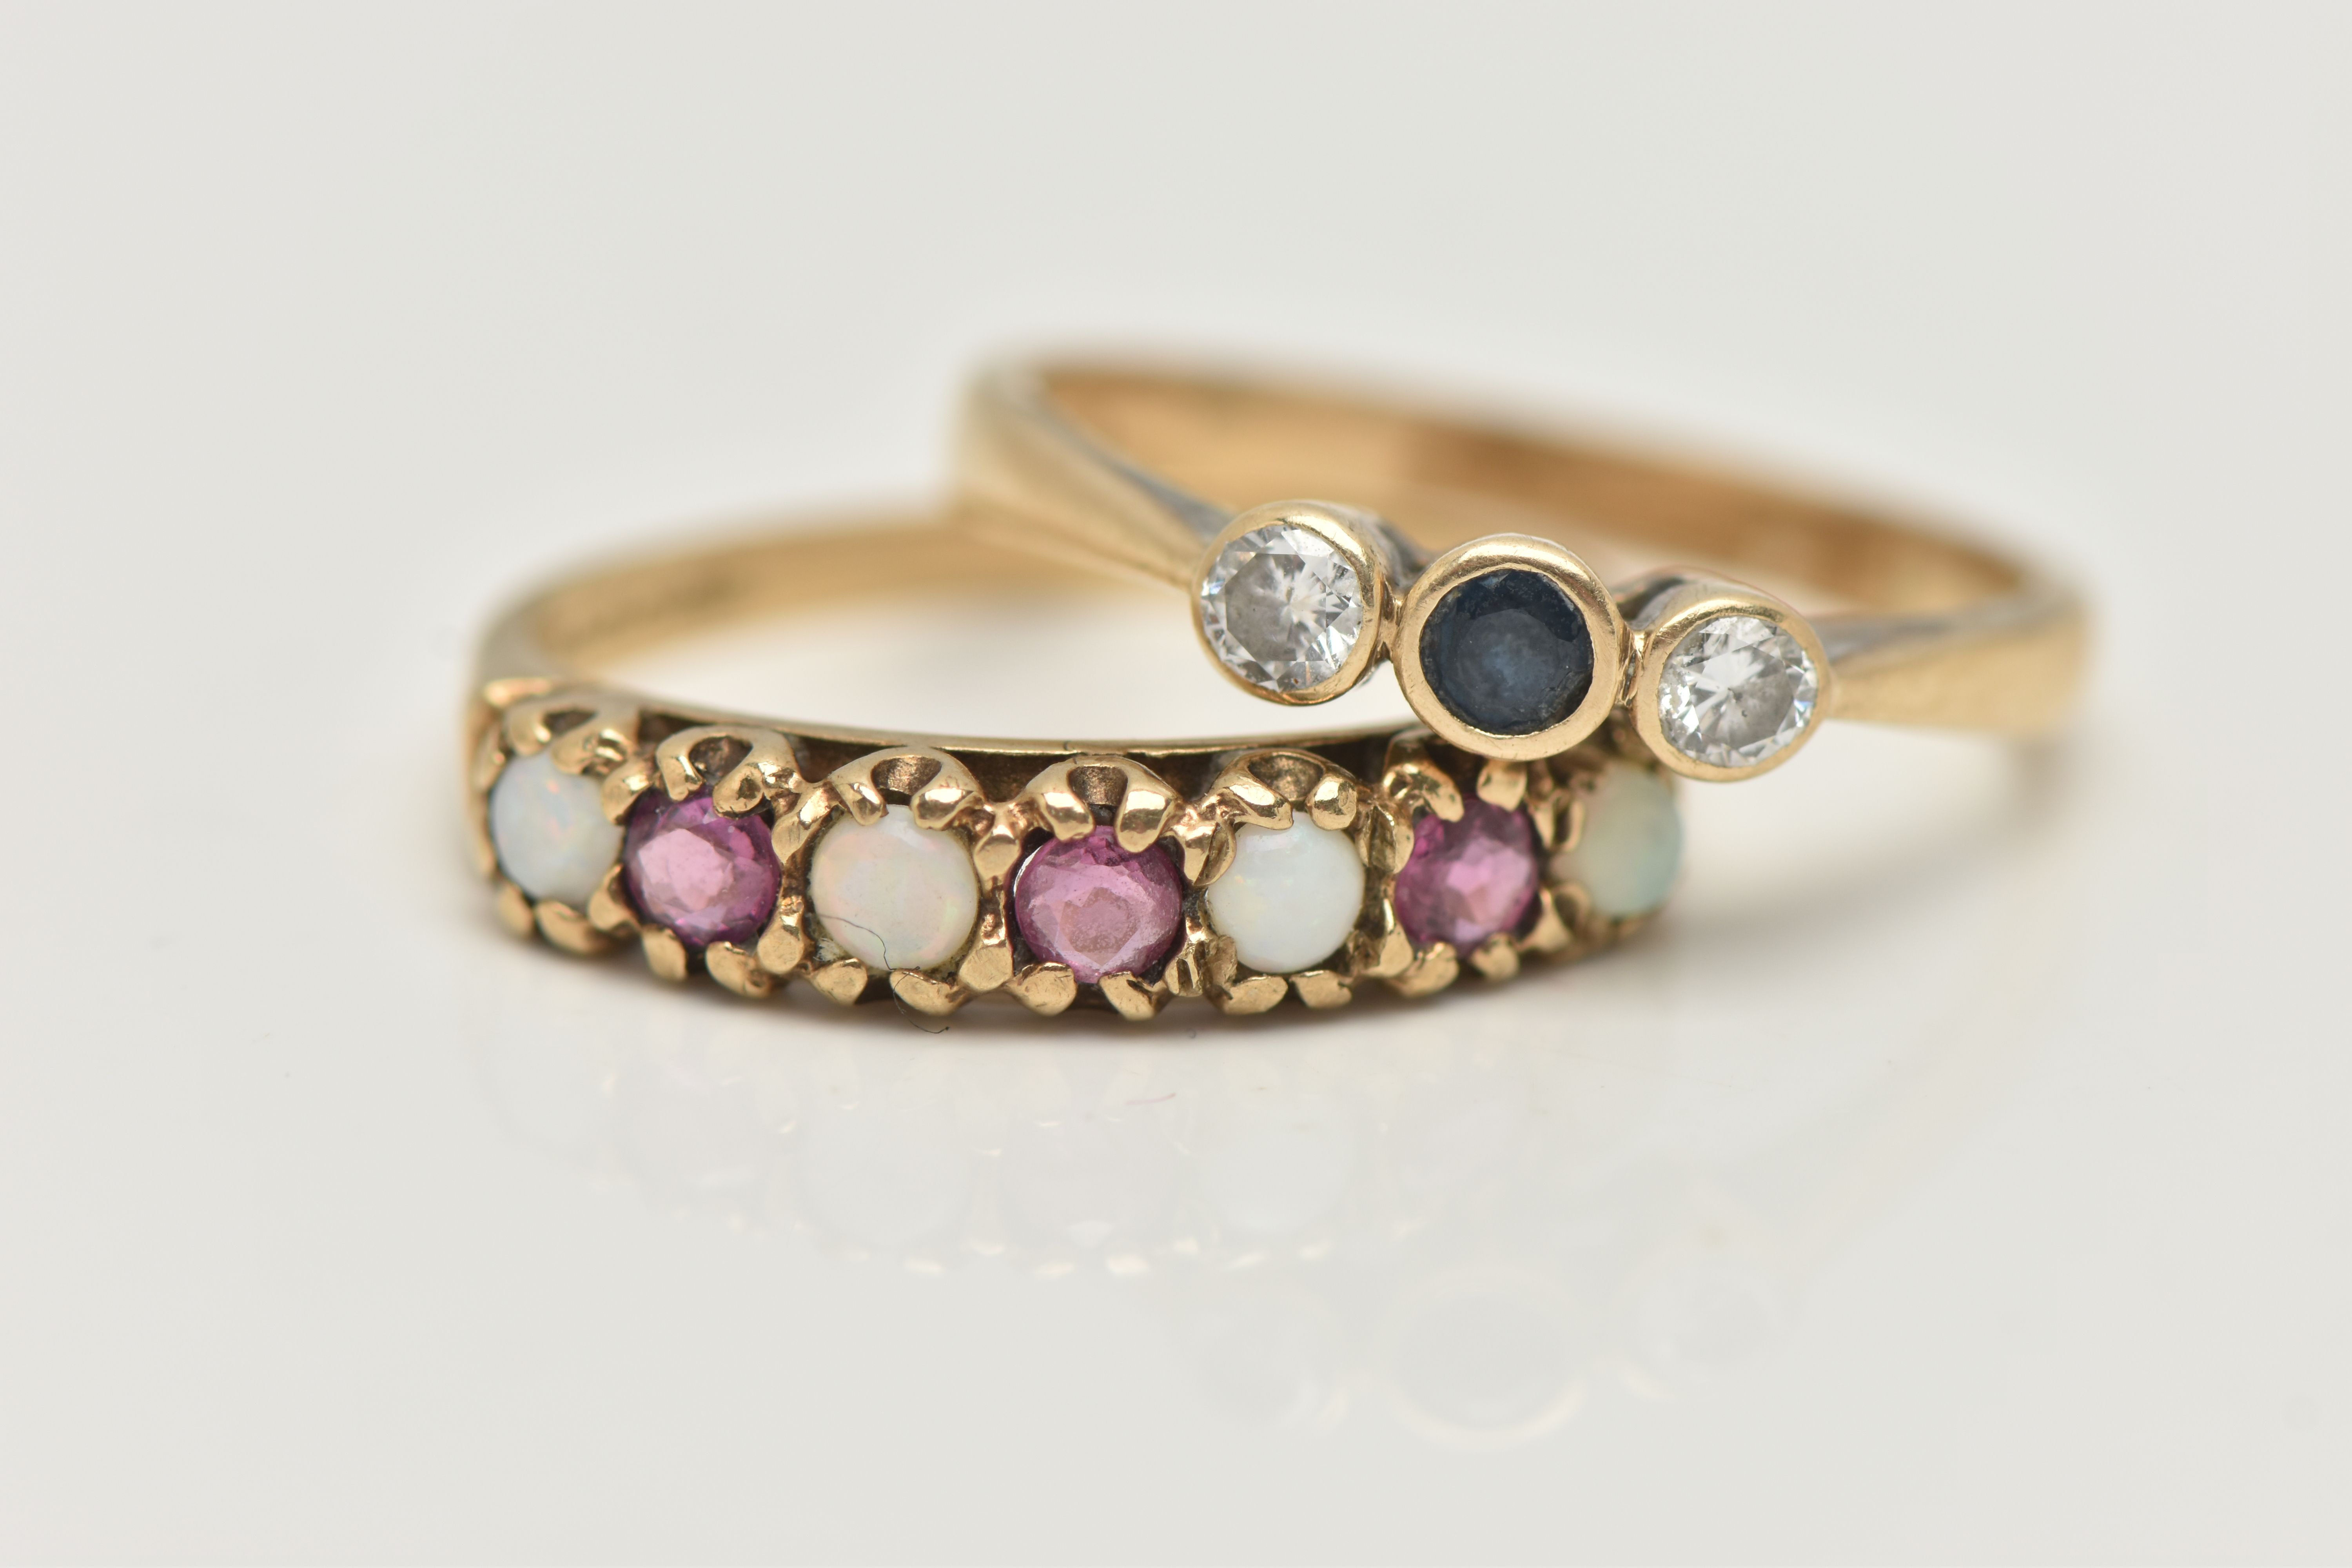 TWO 9CT GOLD GEM SET RINGS, the first designed as a central circular cut sapphire flanked by